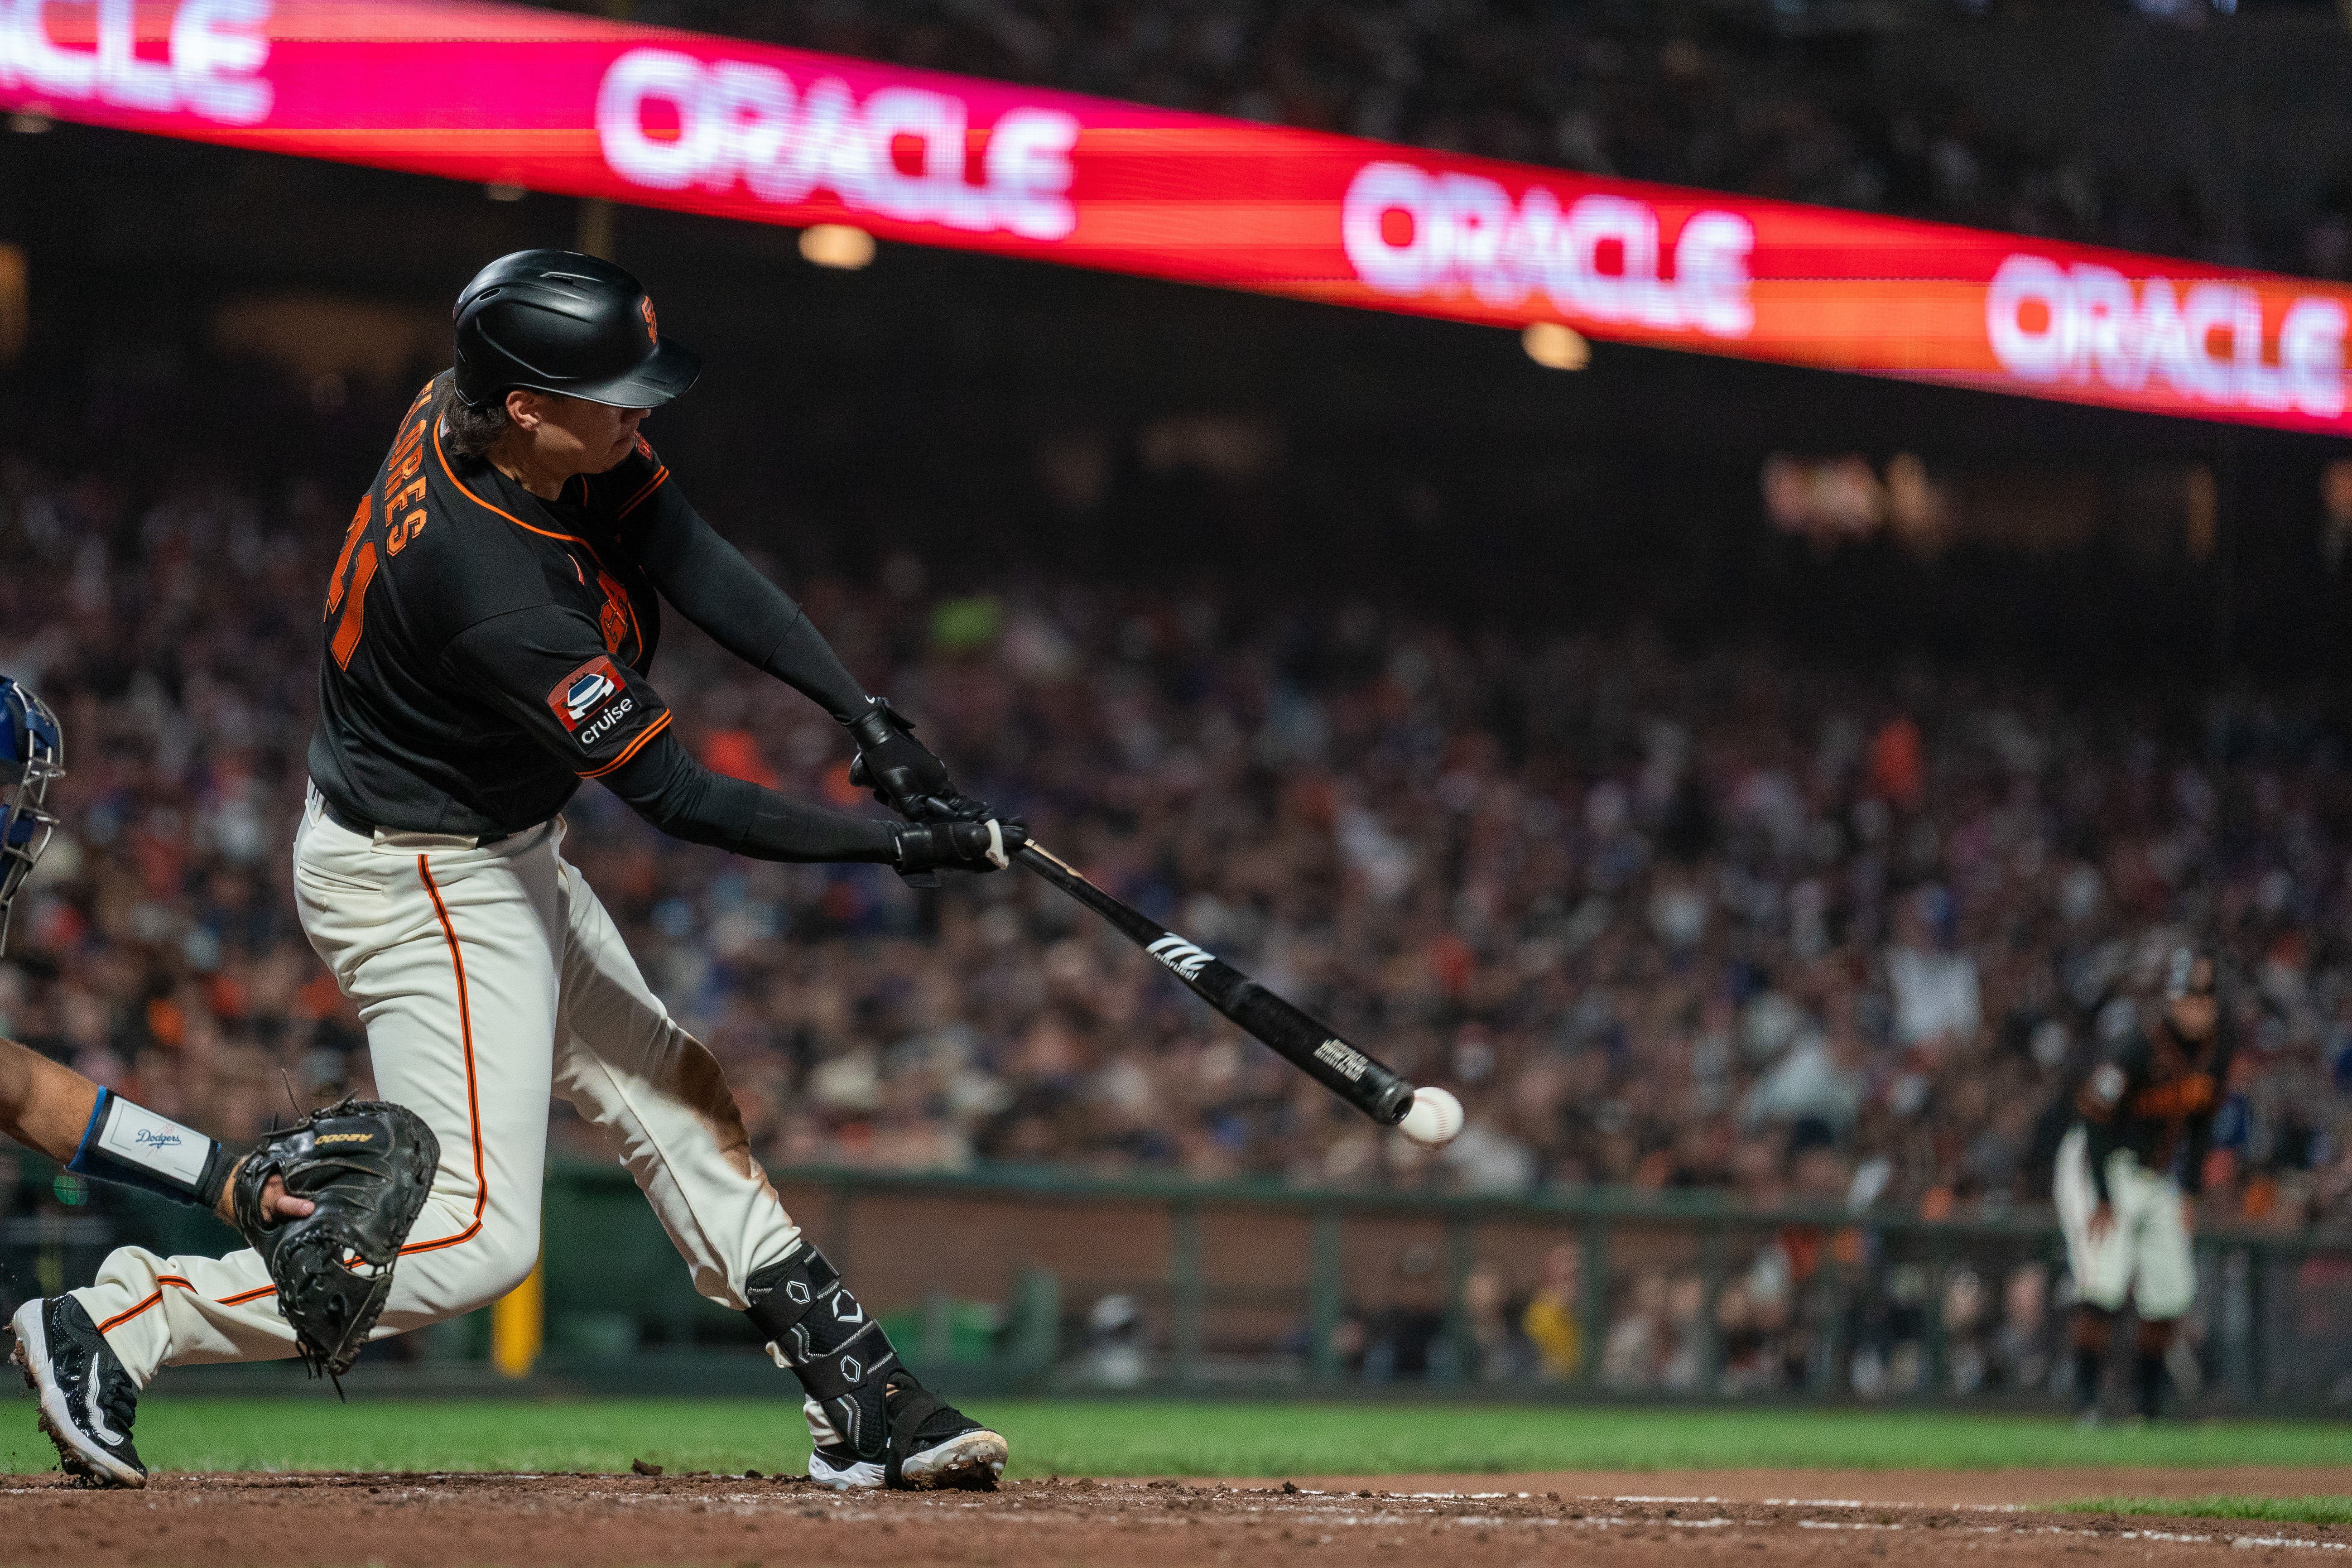 Tristan Beck, Fitzgerald lead SF Giants to 2-1 win over Dodgers